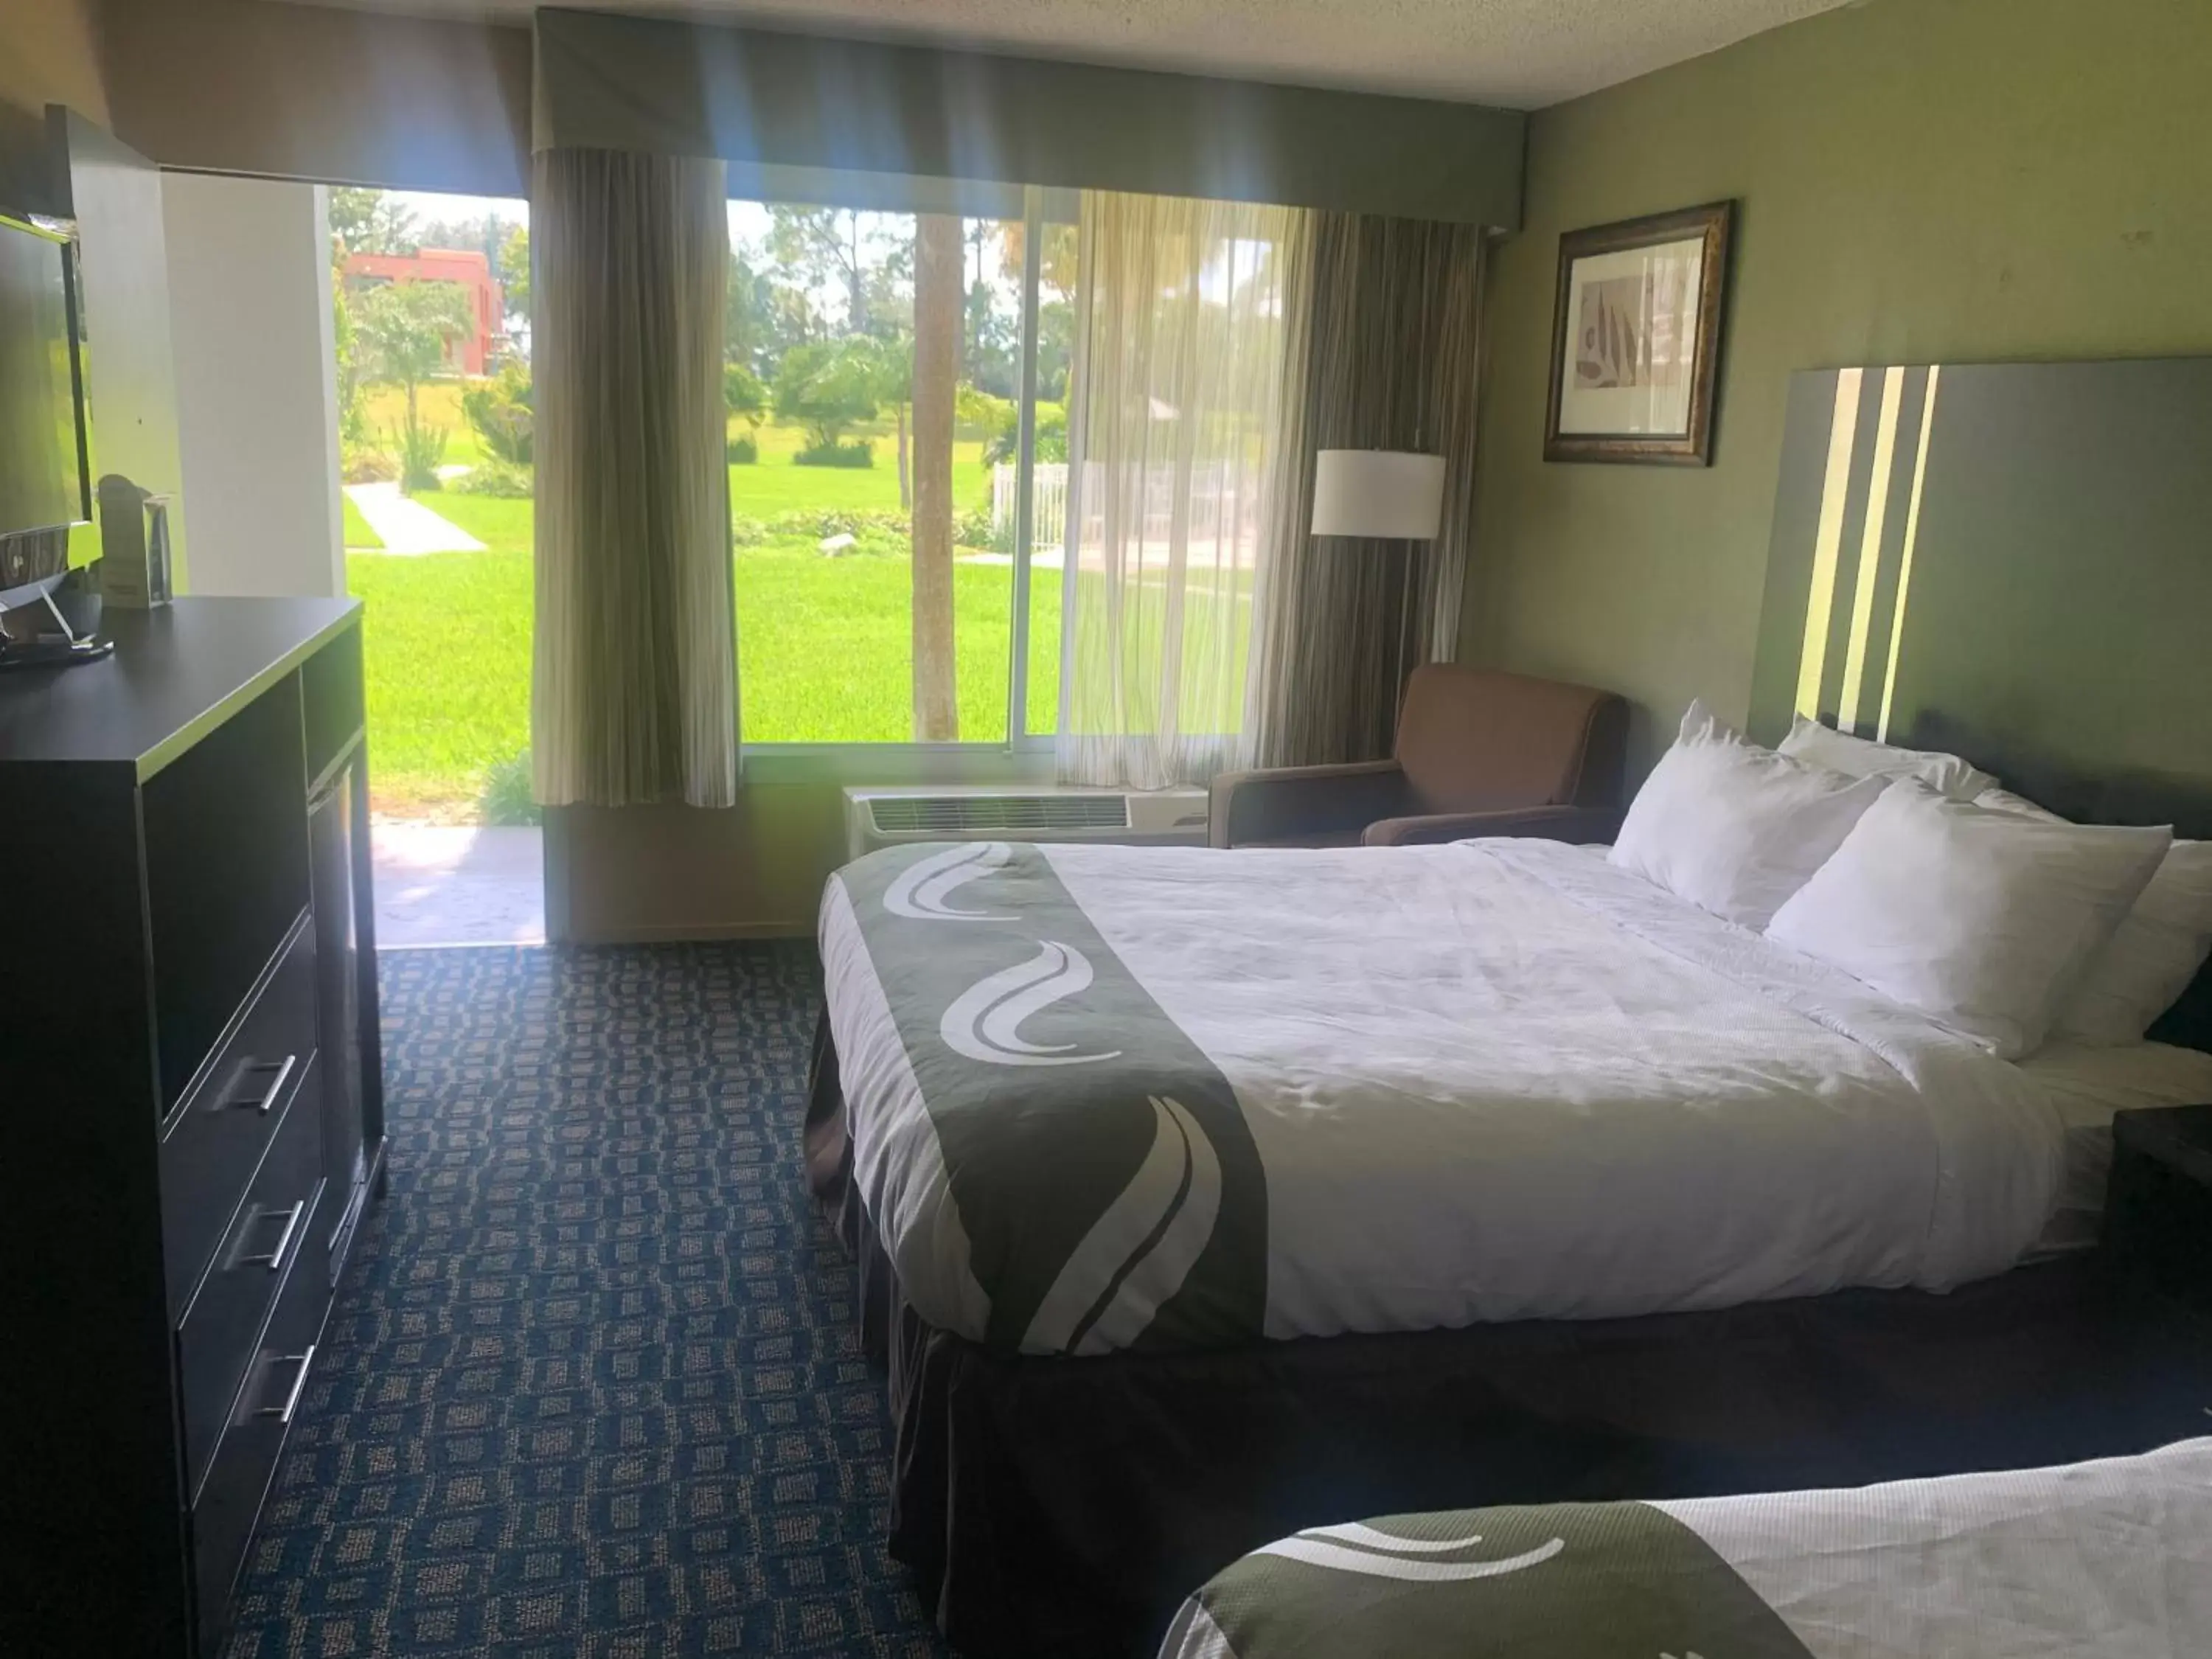 Garden, Bed in Quality Inn & Suites Brooksville I-75/Dade City